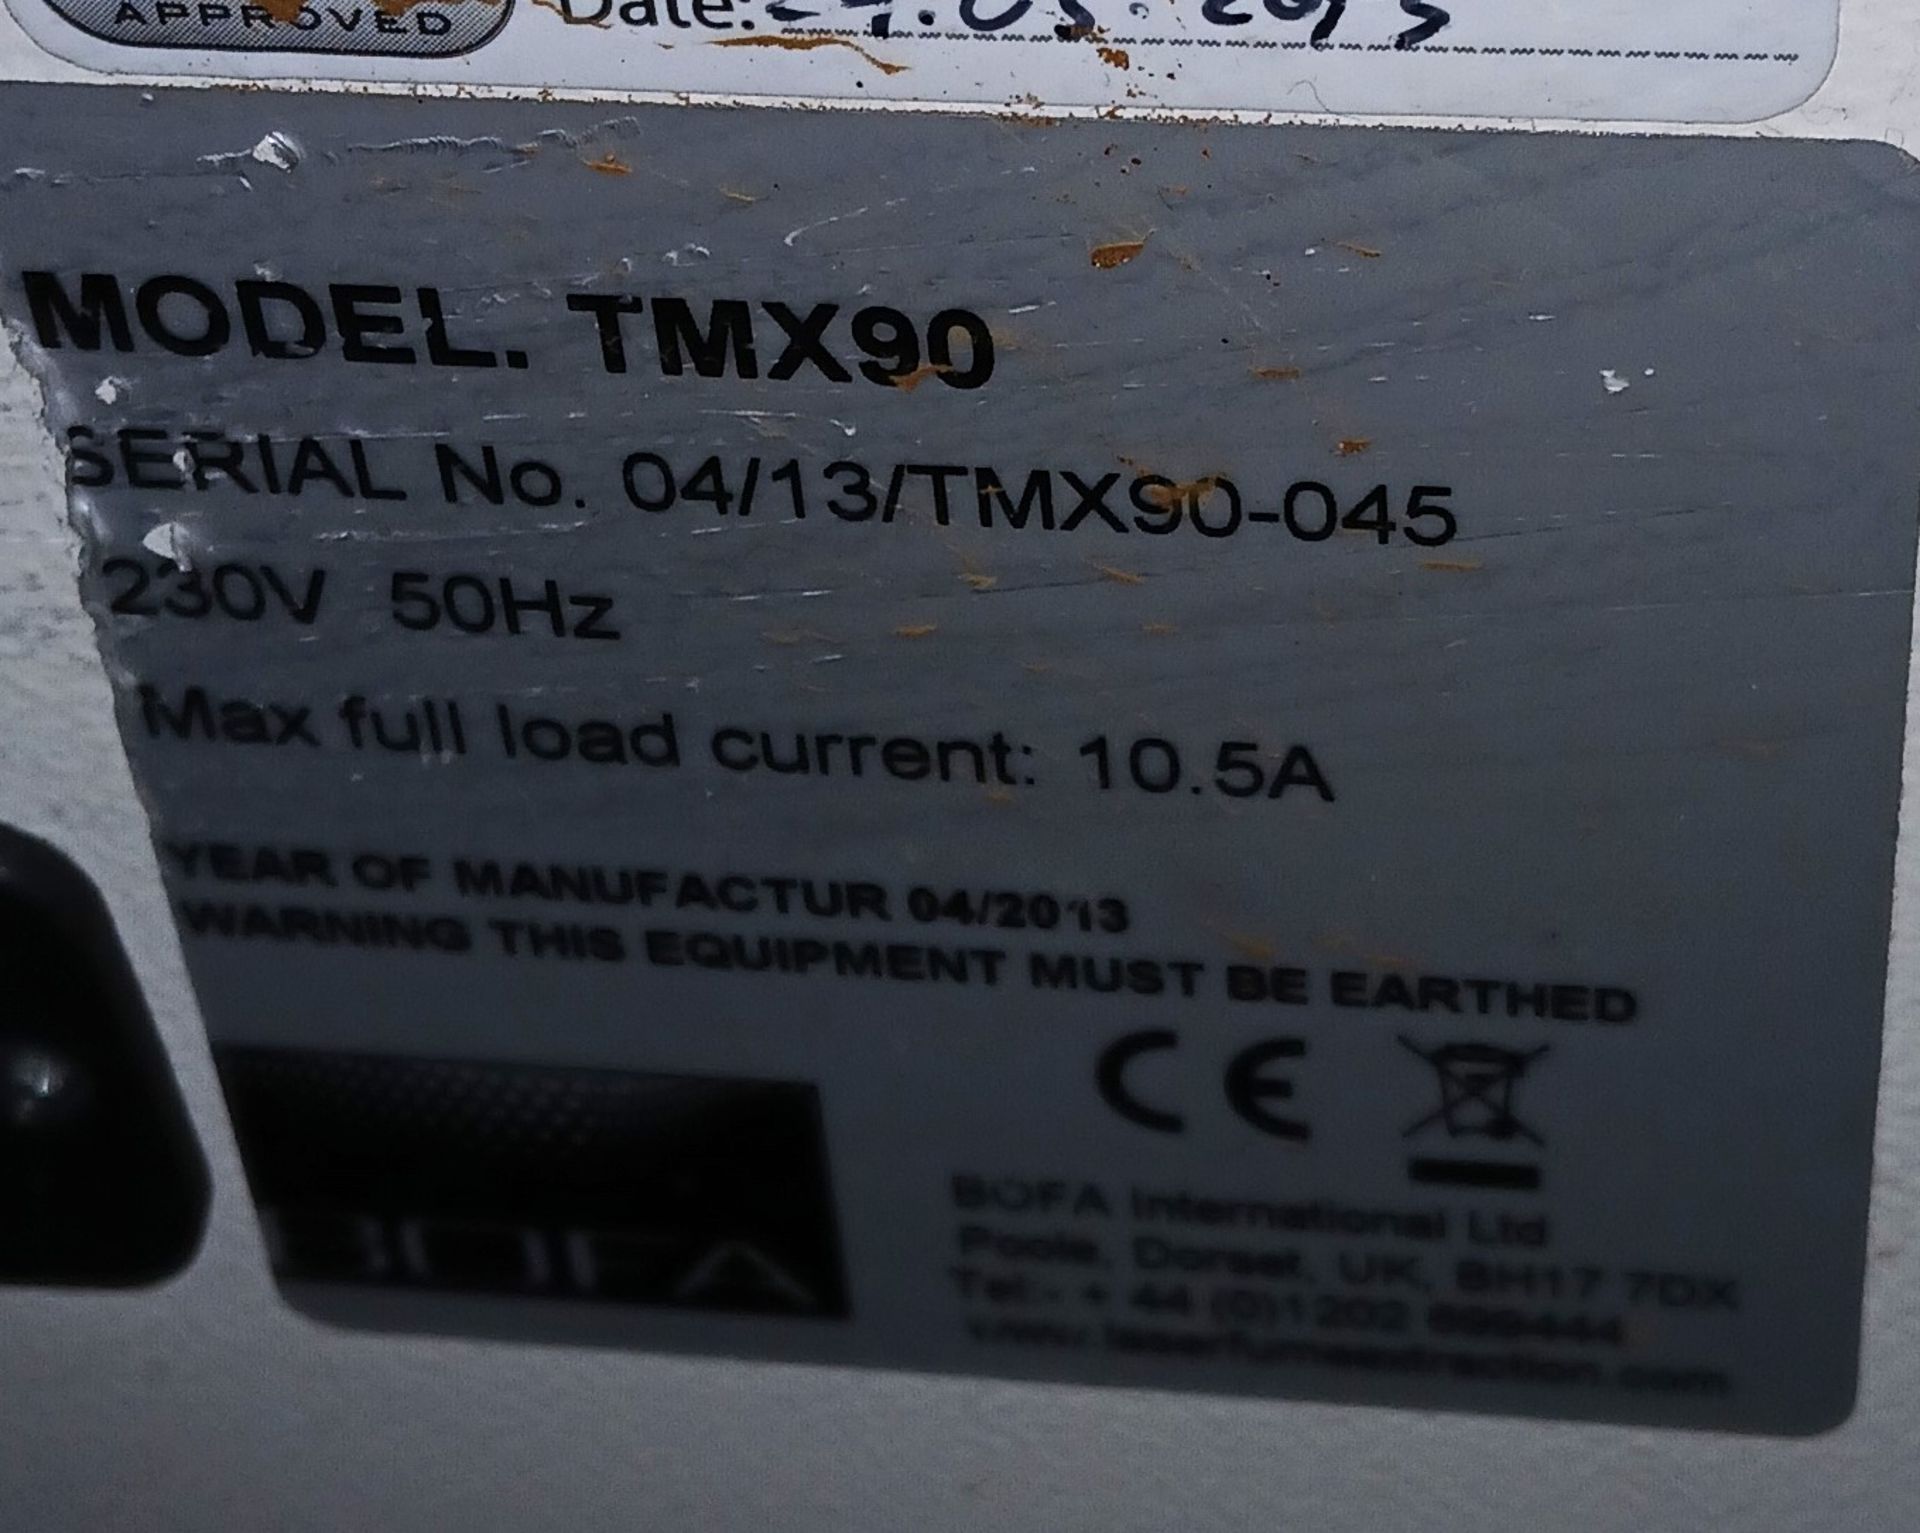 CTR Lasers TMX90 laser engraving machine Serial number 04/13/TMX90-045 – RAMS required for - Image 6 of 6